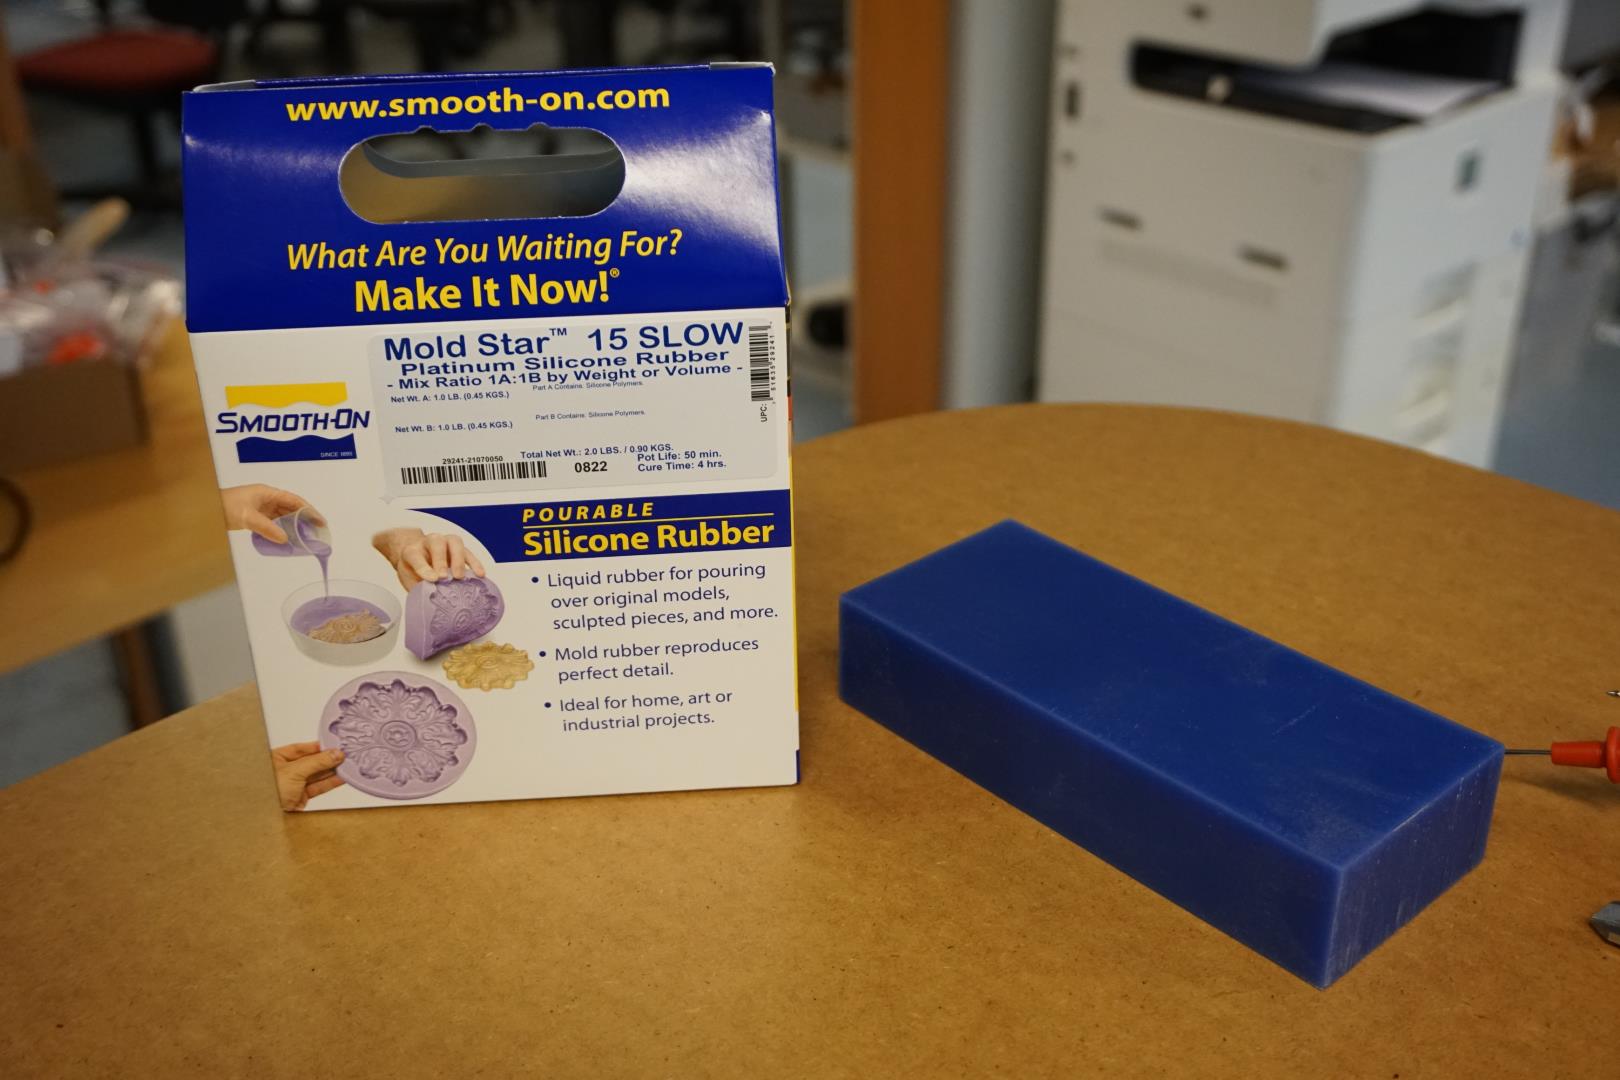 The wax block and silicone to be used